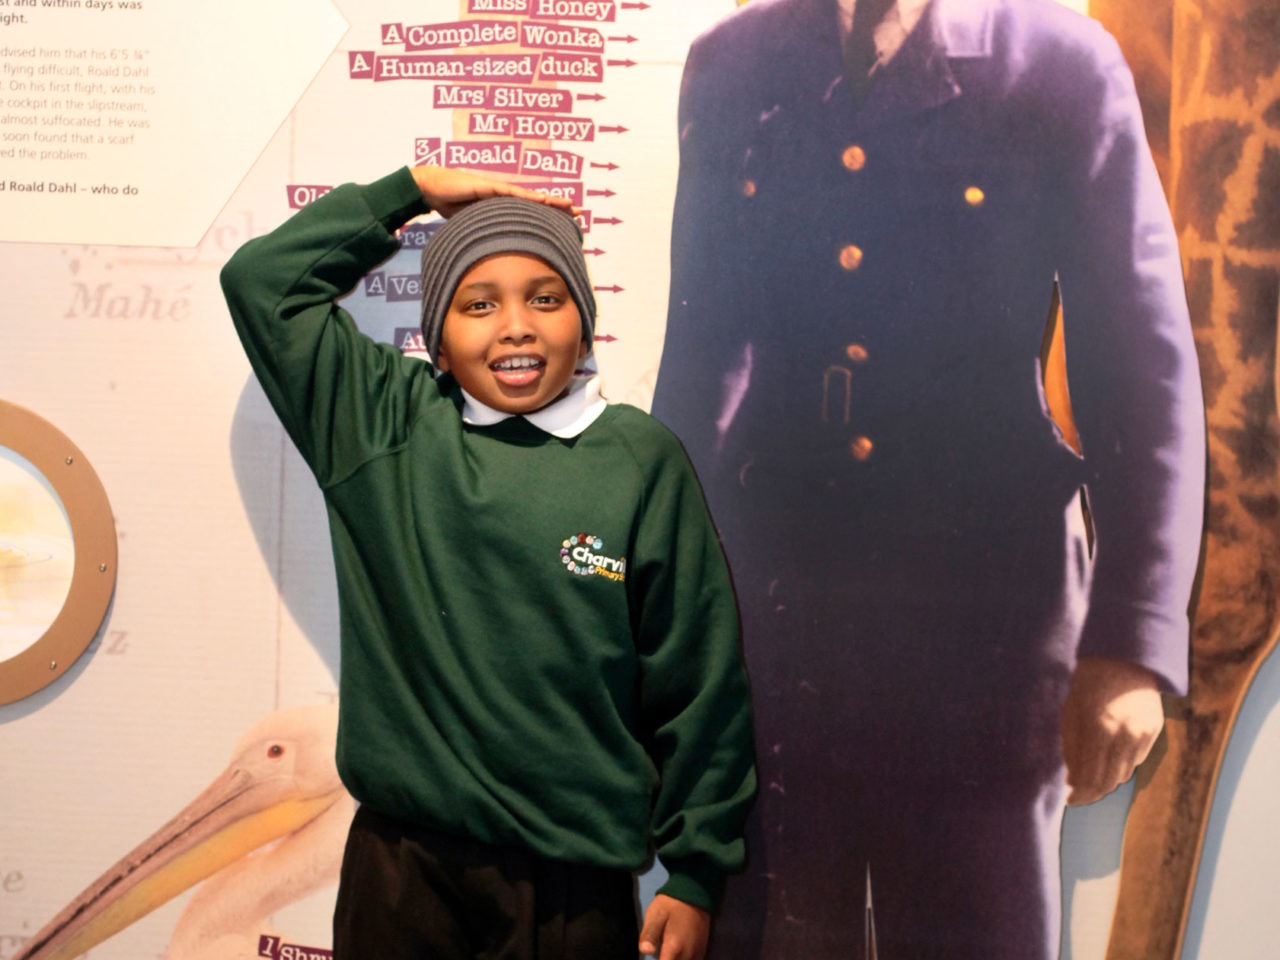 A photo of a smiling boy. He's in green school uniform and stood against a height chart that features the heights of Roald Dahl characters. He is holing his right hand on top of his head to measure himself.